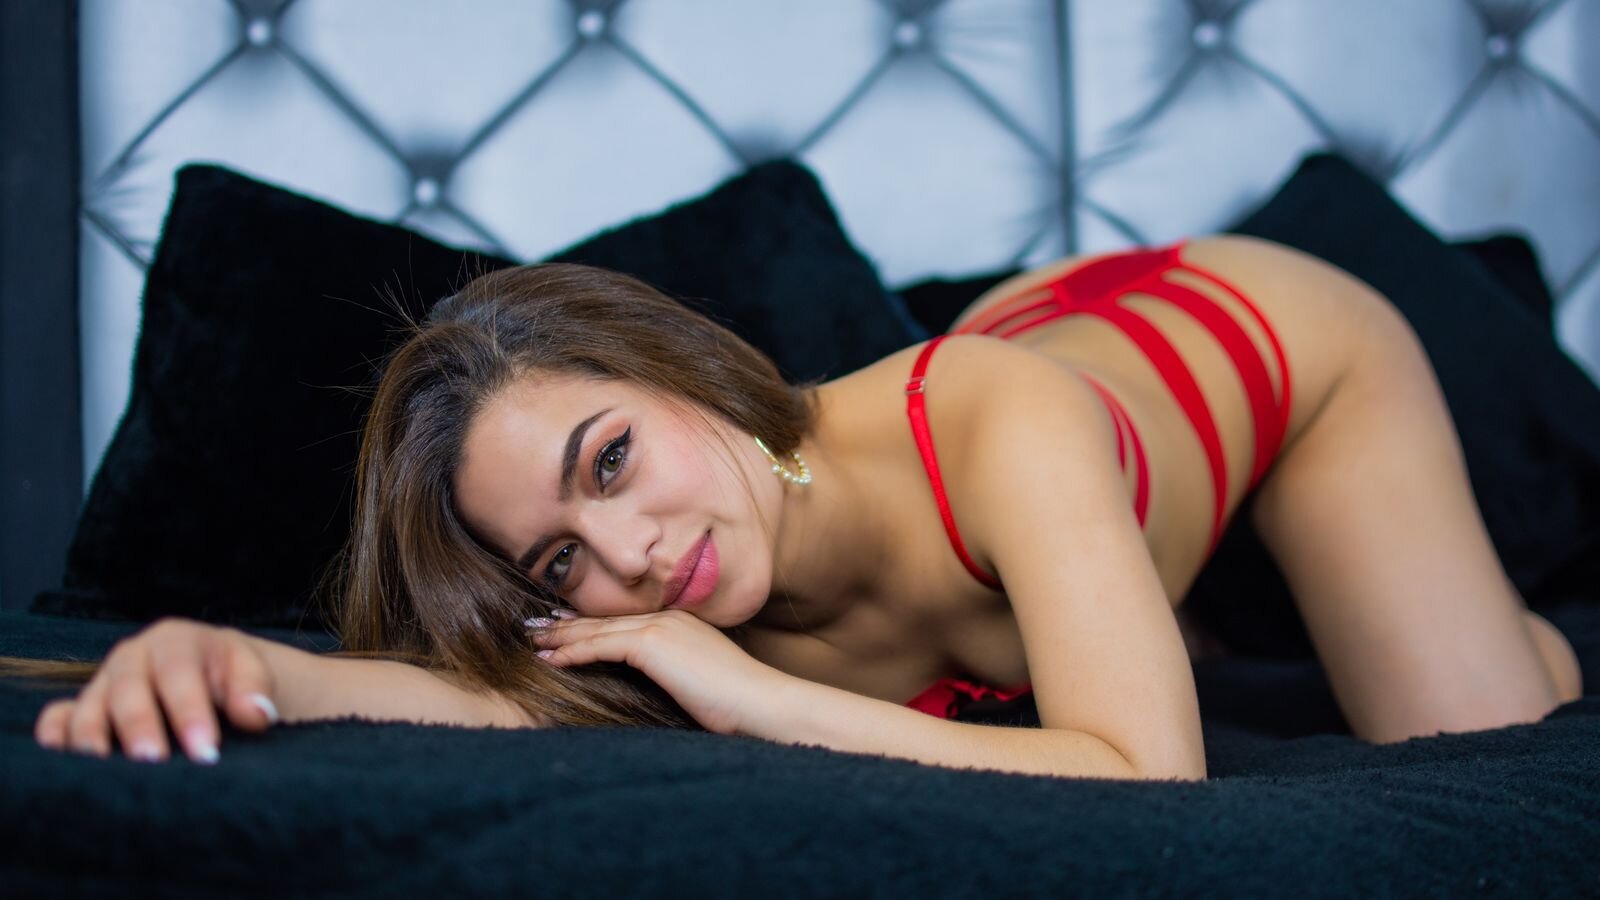 Porn Chat Live with AndreaBeltran